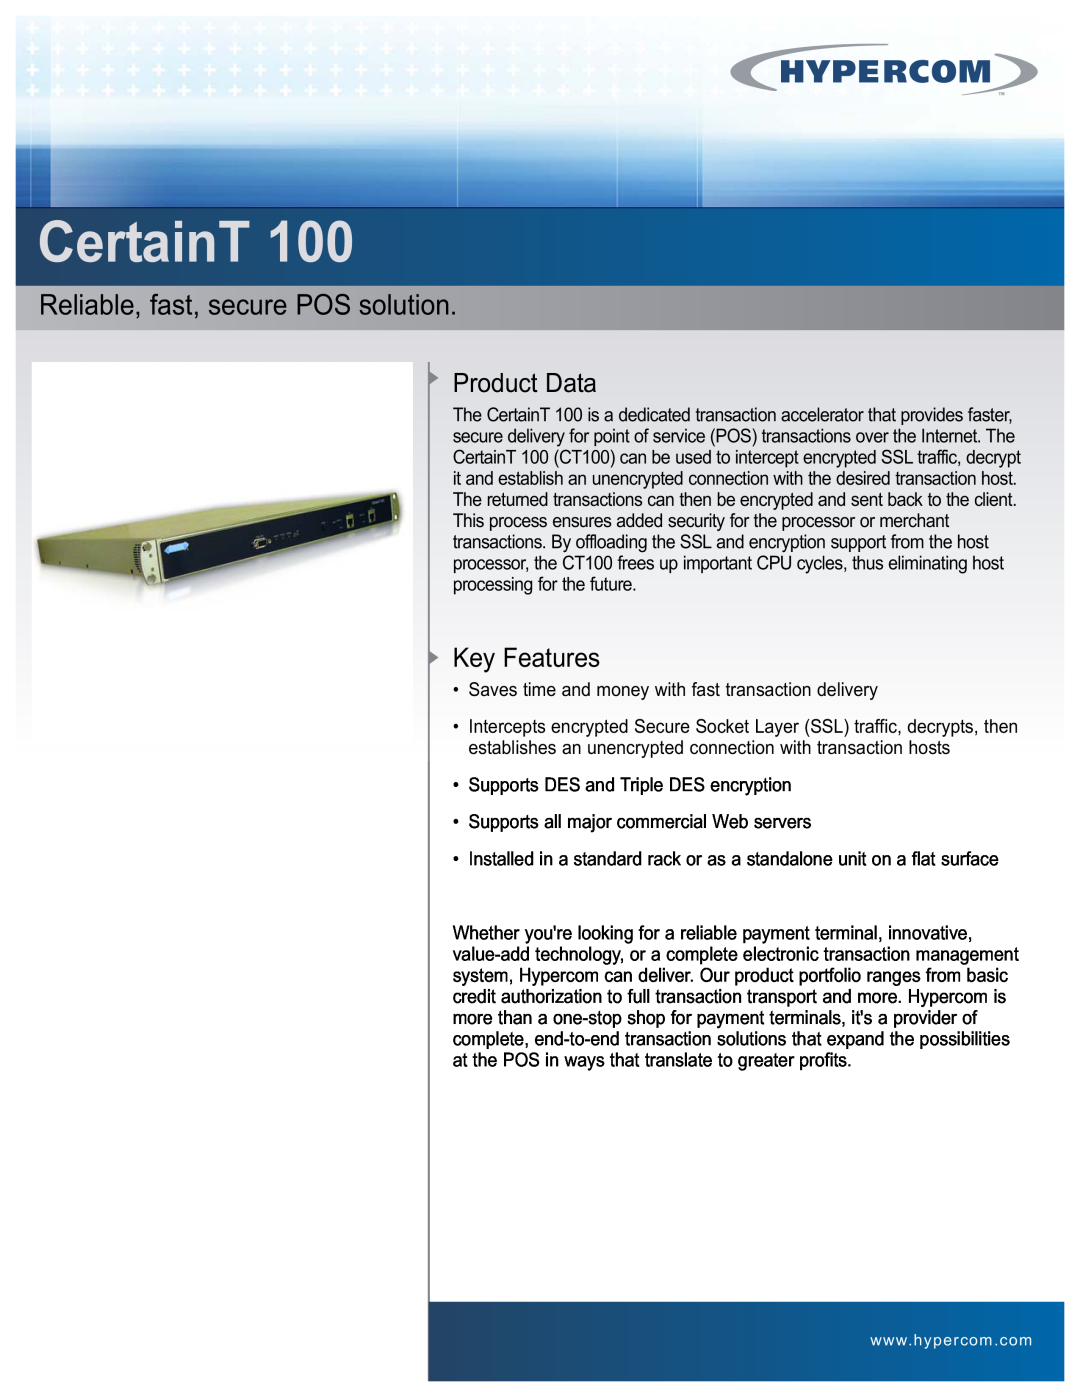 Hypercom CertainT 100 manual Reliable, fast, secure POS solution, Product Data, Key Features 